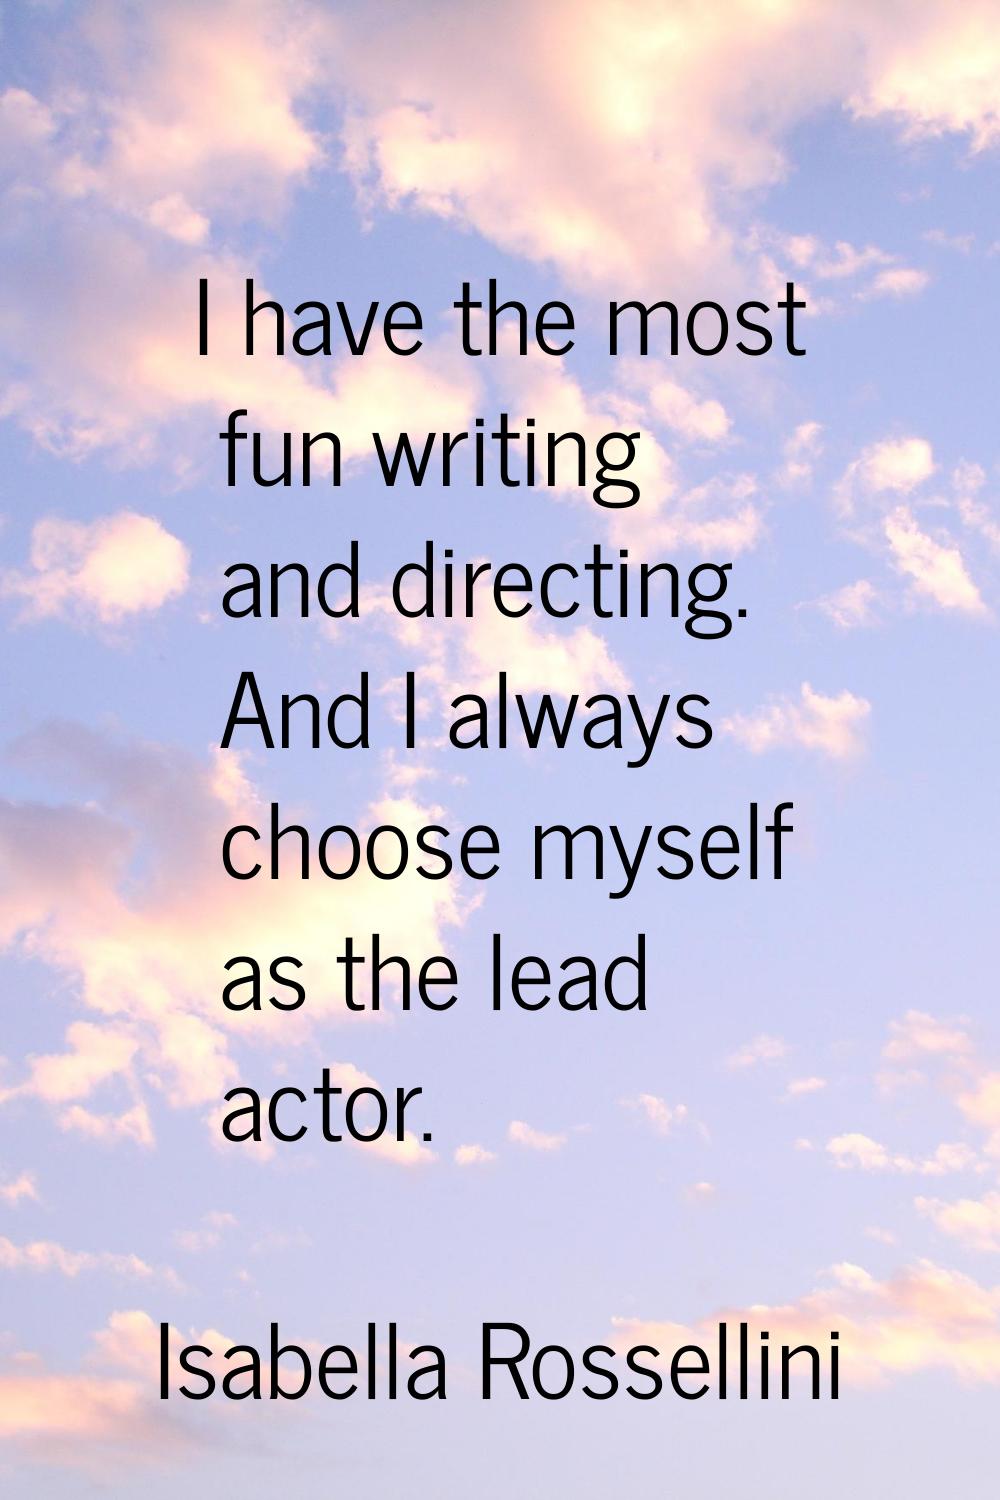 I have the most fun writing and directing. And I always choose myself as the lead actor.